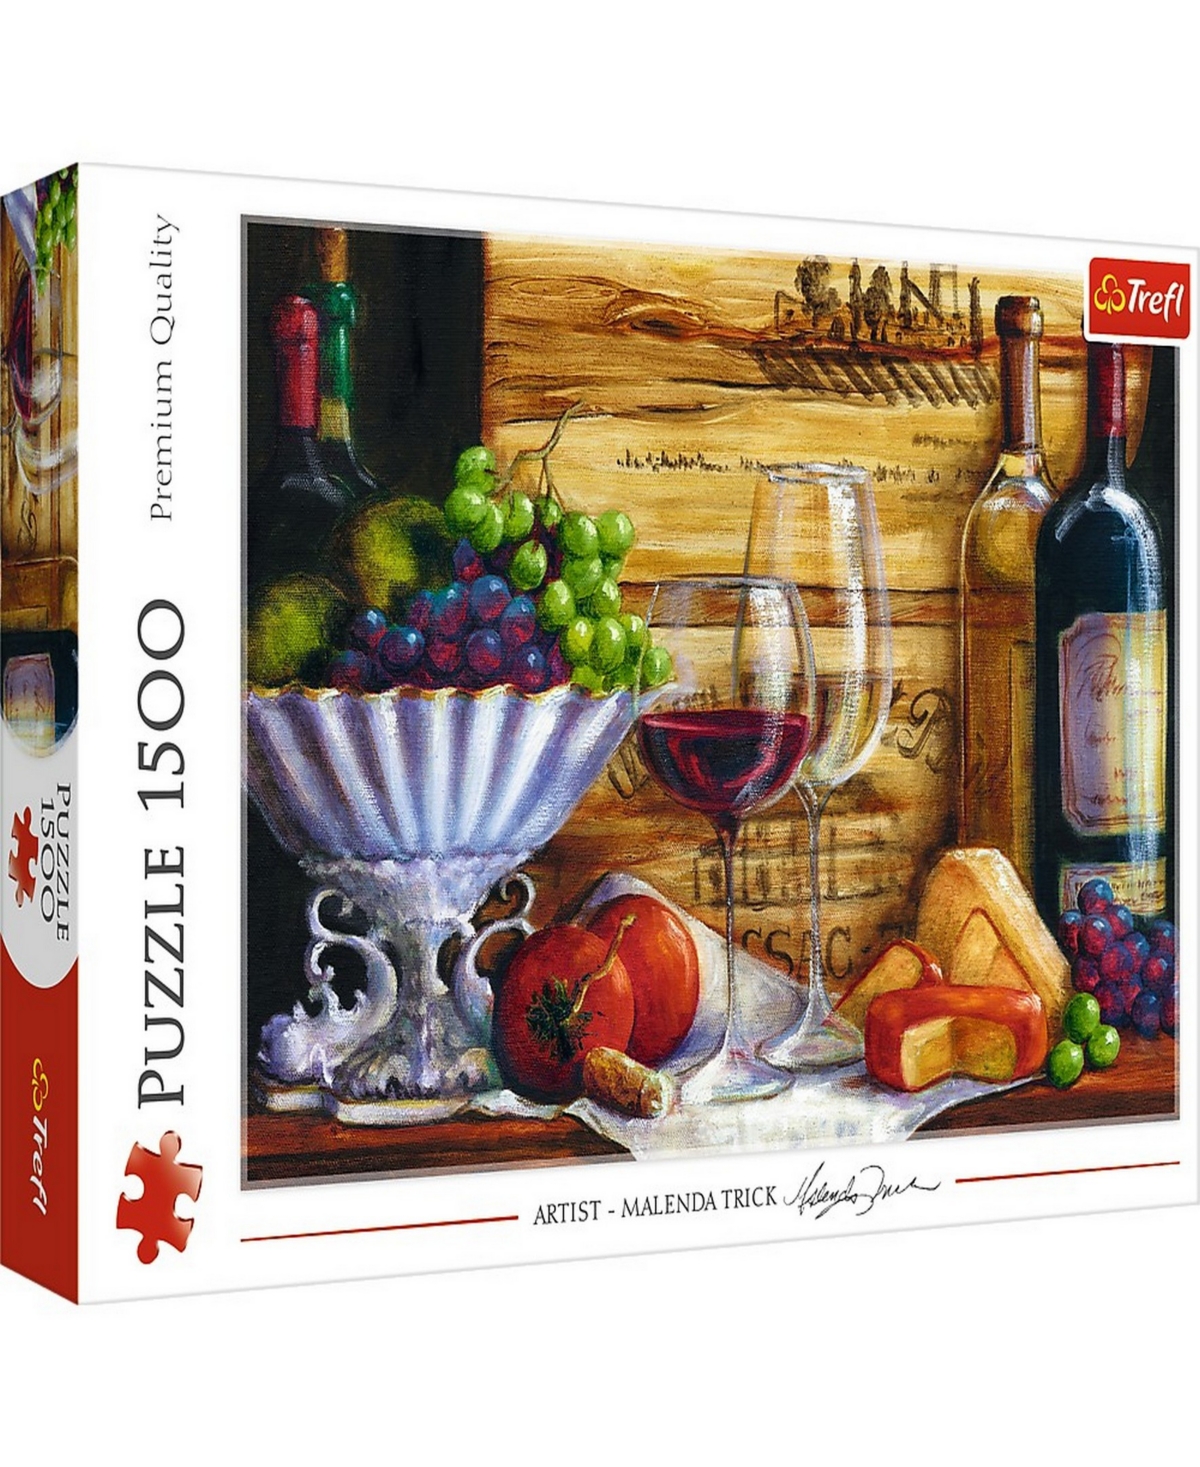 Trefl Jigsaw Puzzle In The Vineyard By Malenda Trick, 1500 Pieces In Multicolor